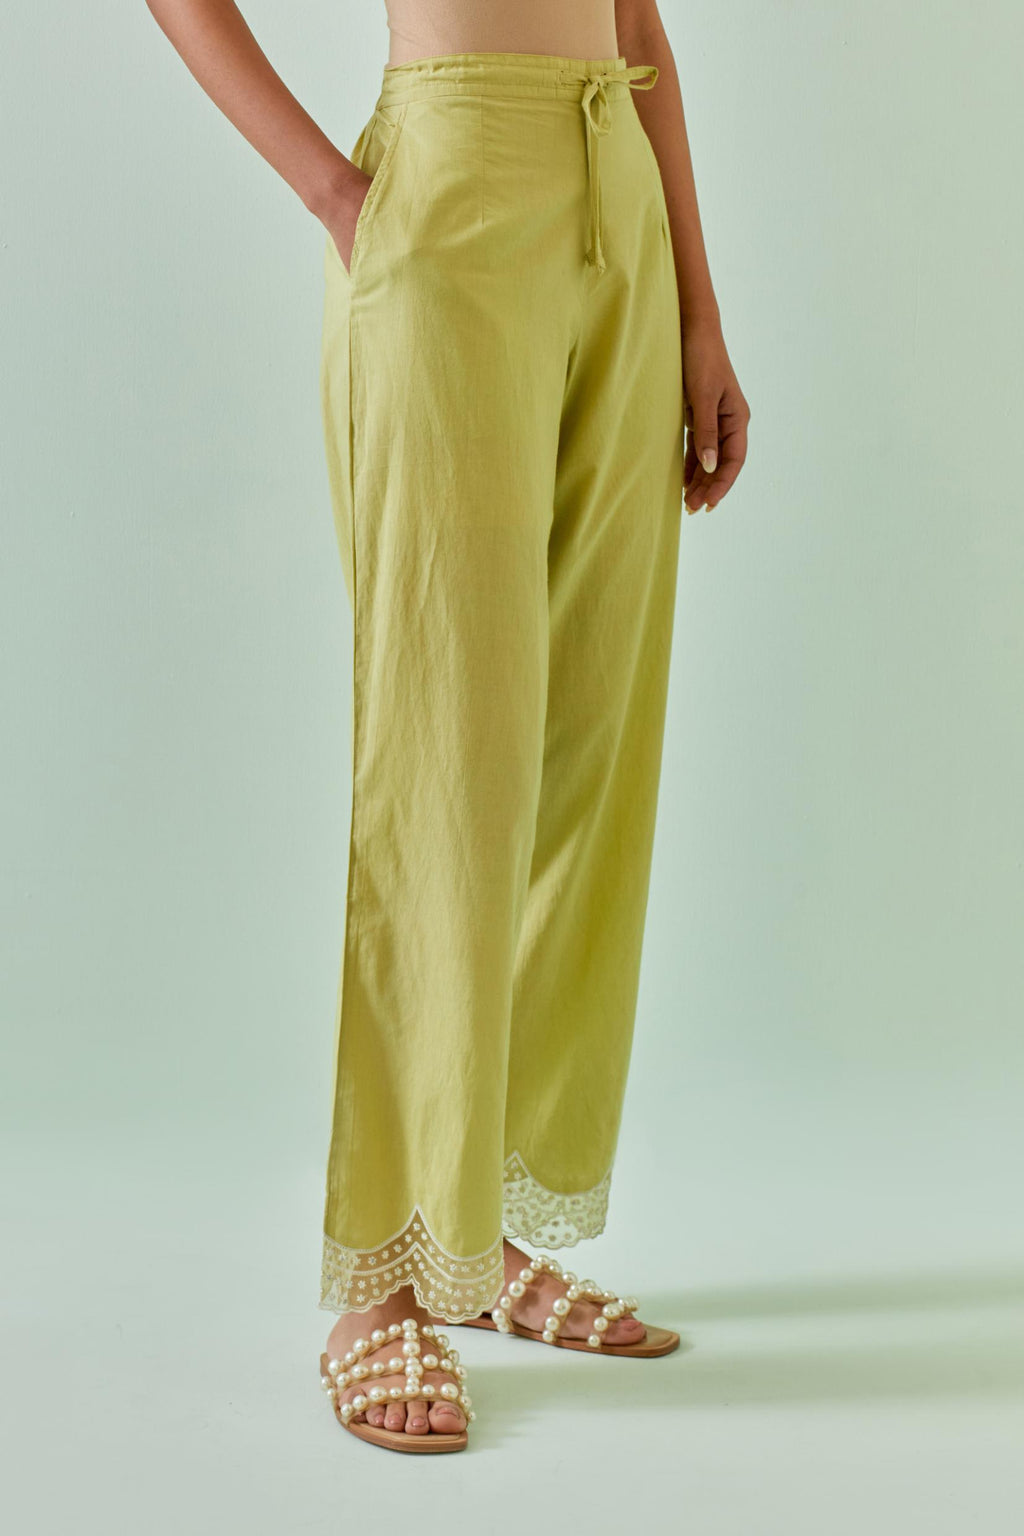 Green straight pants with scalloped embroidery at bottom hem.